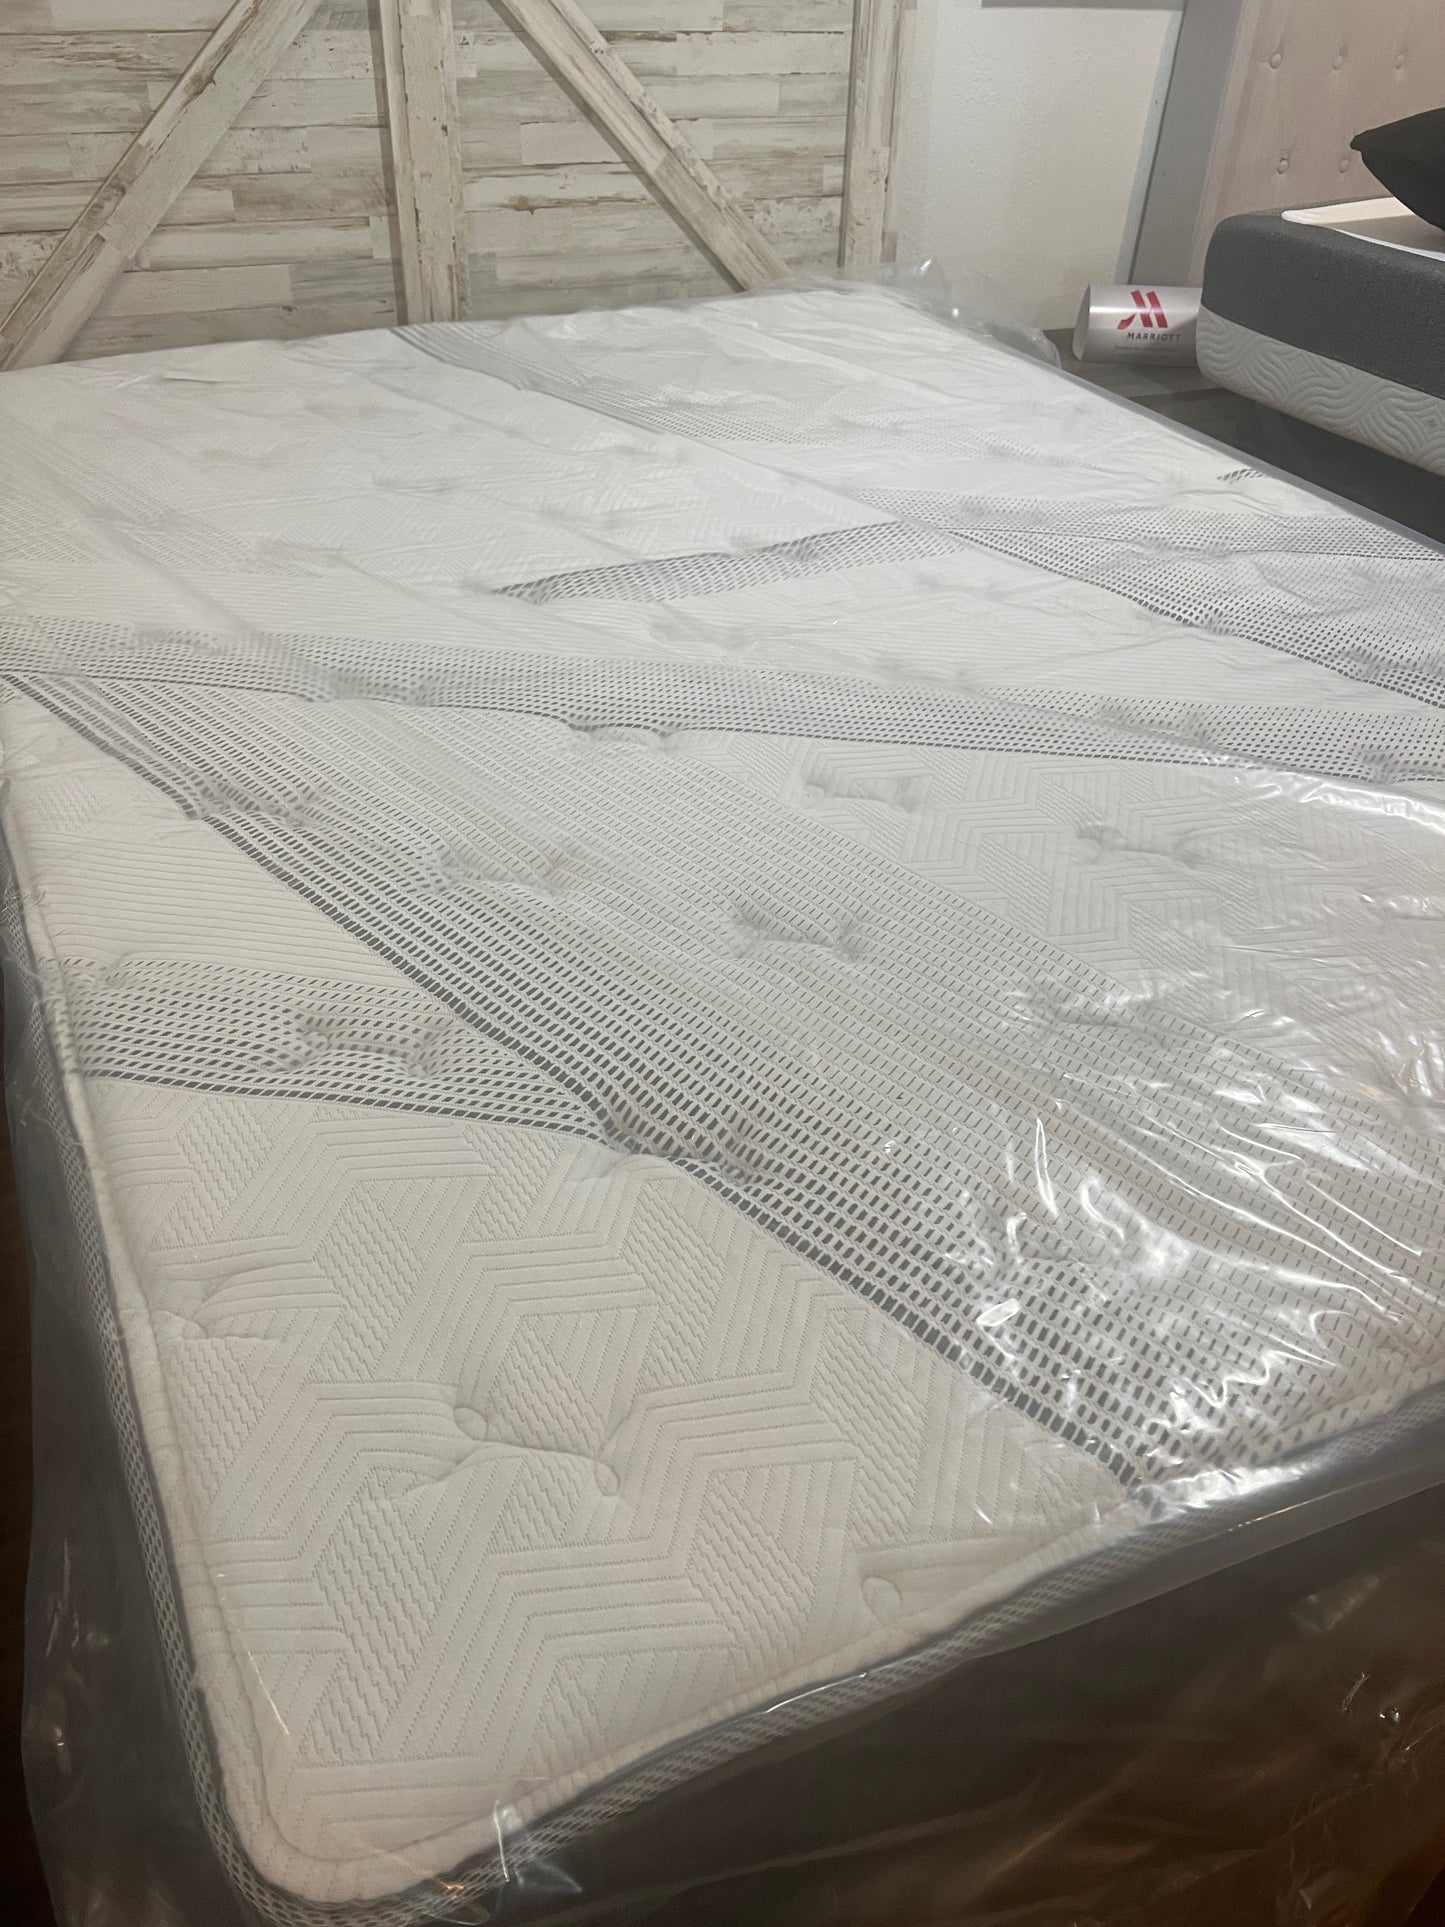 Jamison 13" Double sided  Sunrise Pillowtop Queen Mattress